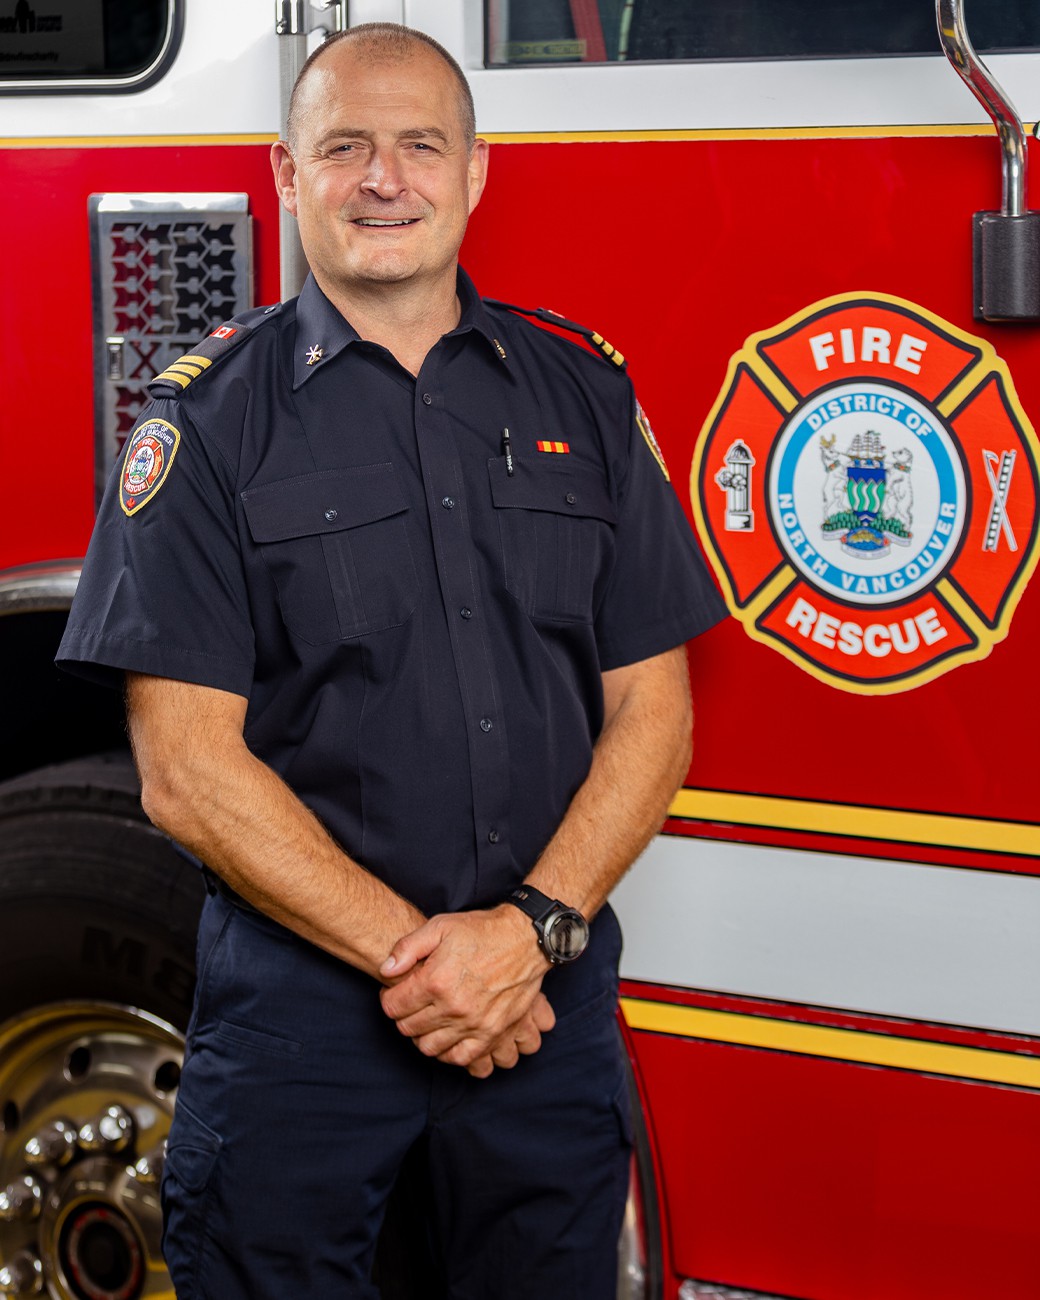 Assistant Fire Chief – Operations, Mark Dear